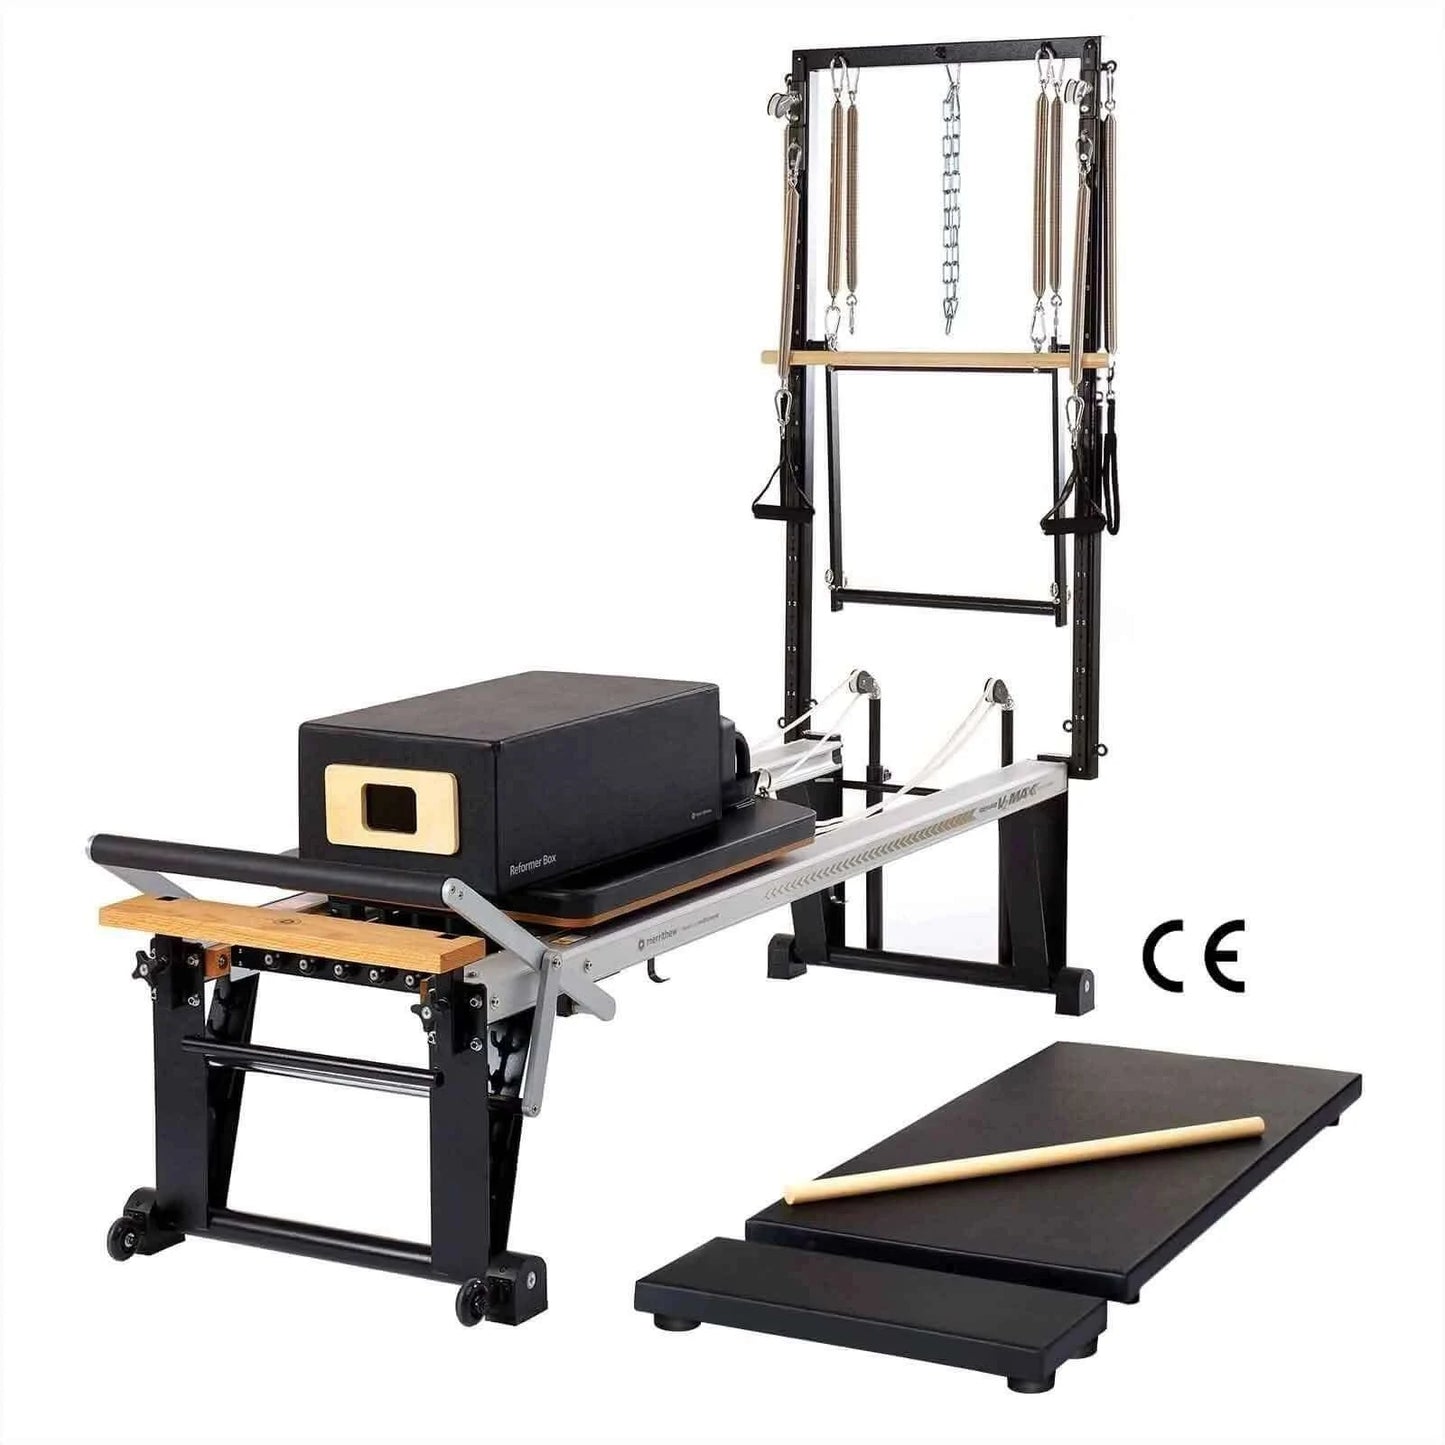 Black Merrithew™ Pilates Rehab V2 Max Plus™ Reformer Bundle by Merrithew™ sold by Pilates Matters® by BSP LLC